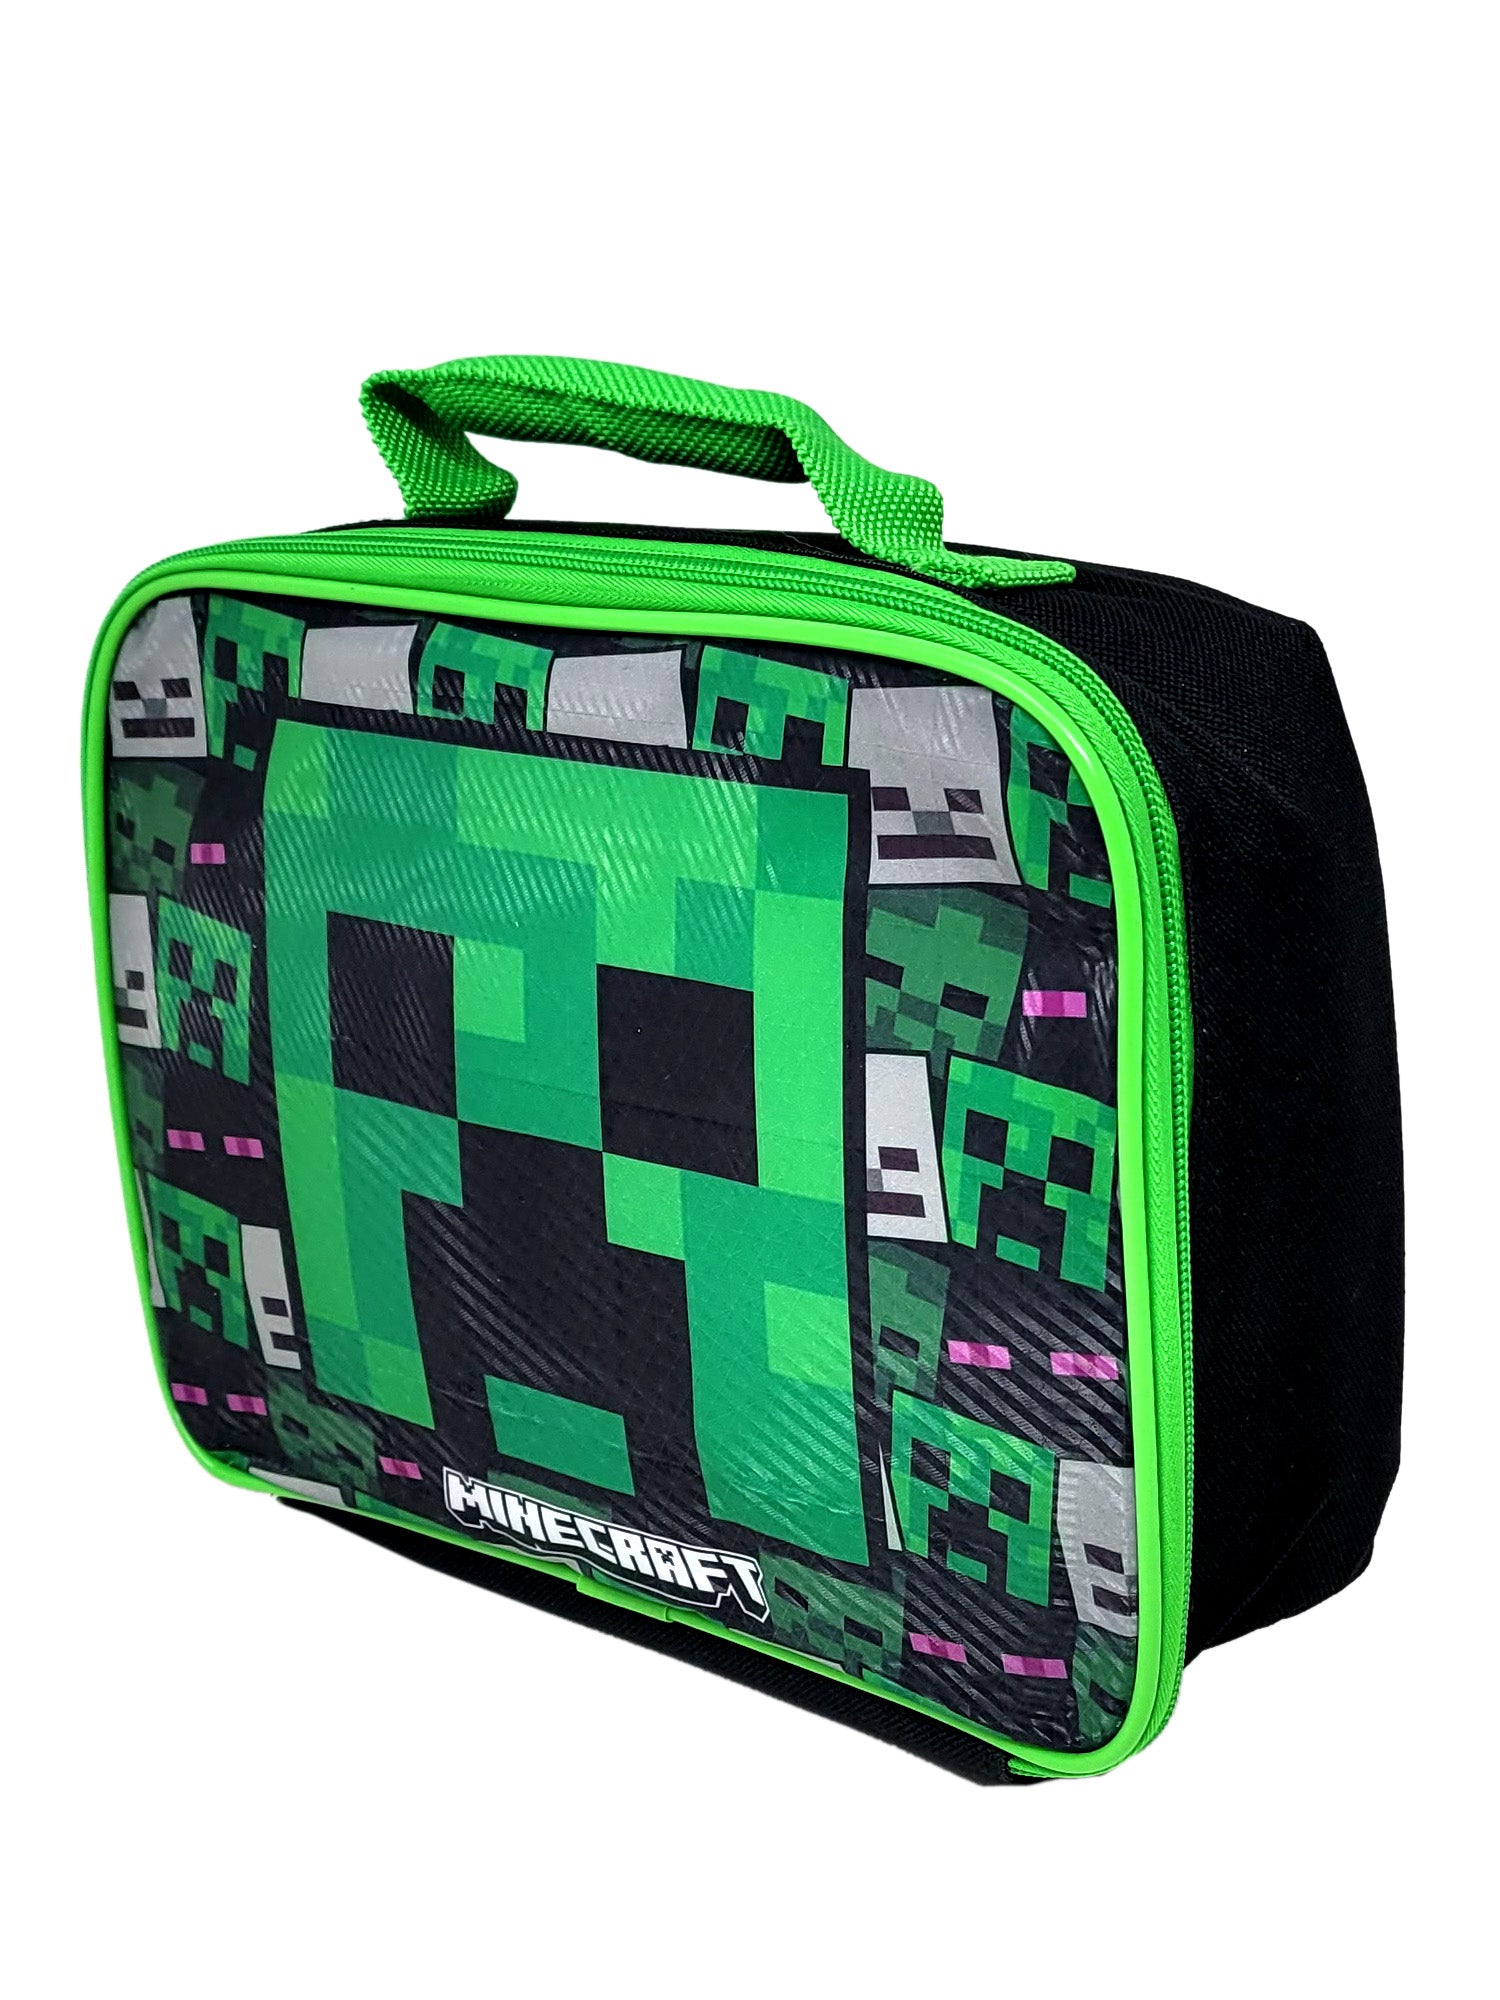 Minecraft Insulated Lunch Bag Skeleton Creeper Zombie Mob Gaming